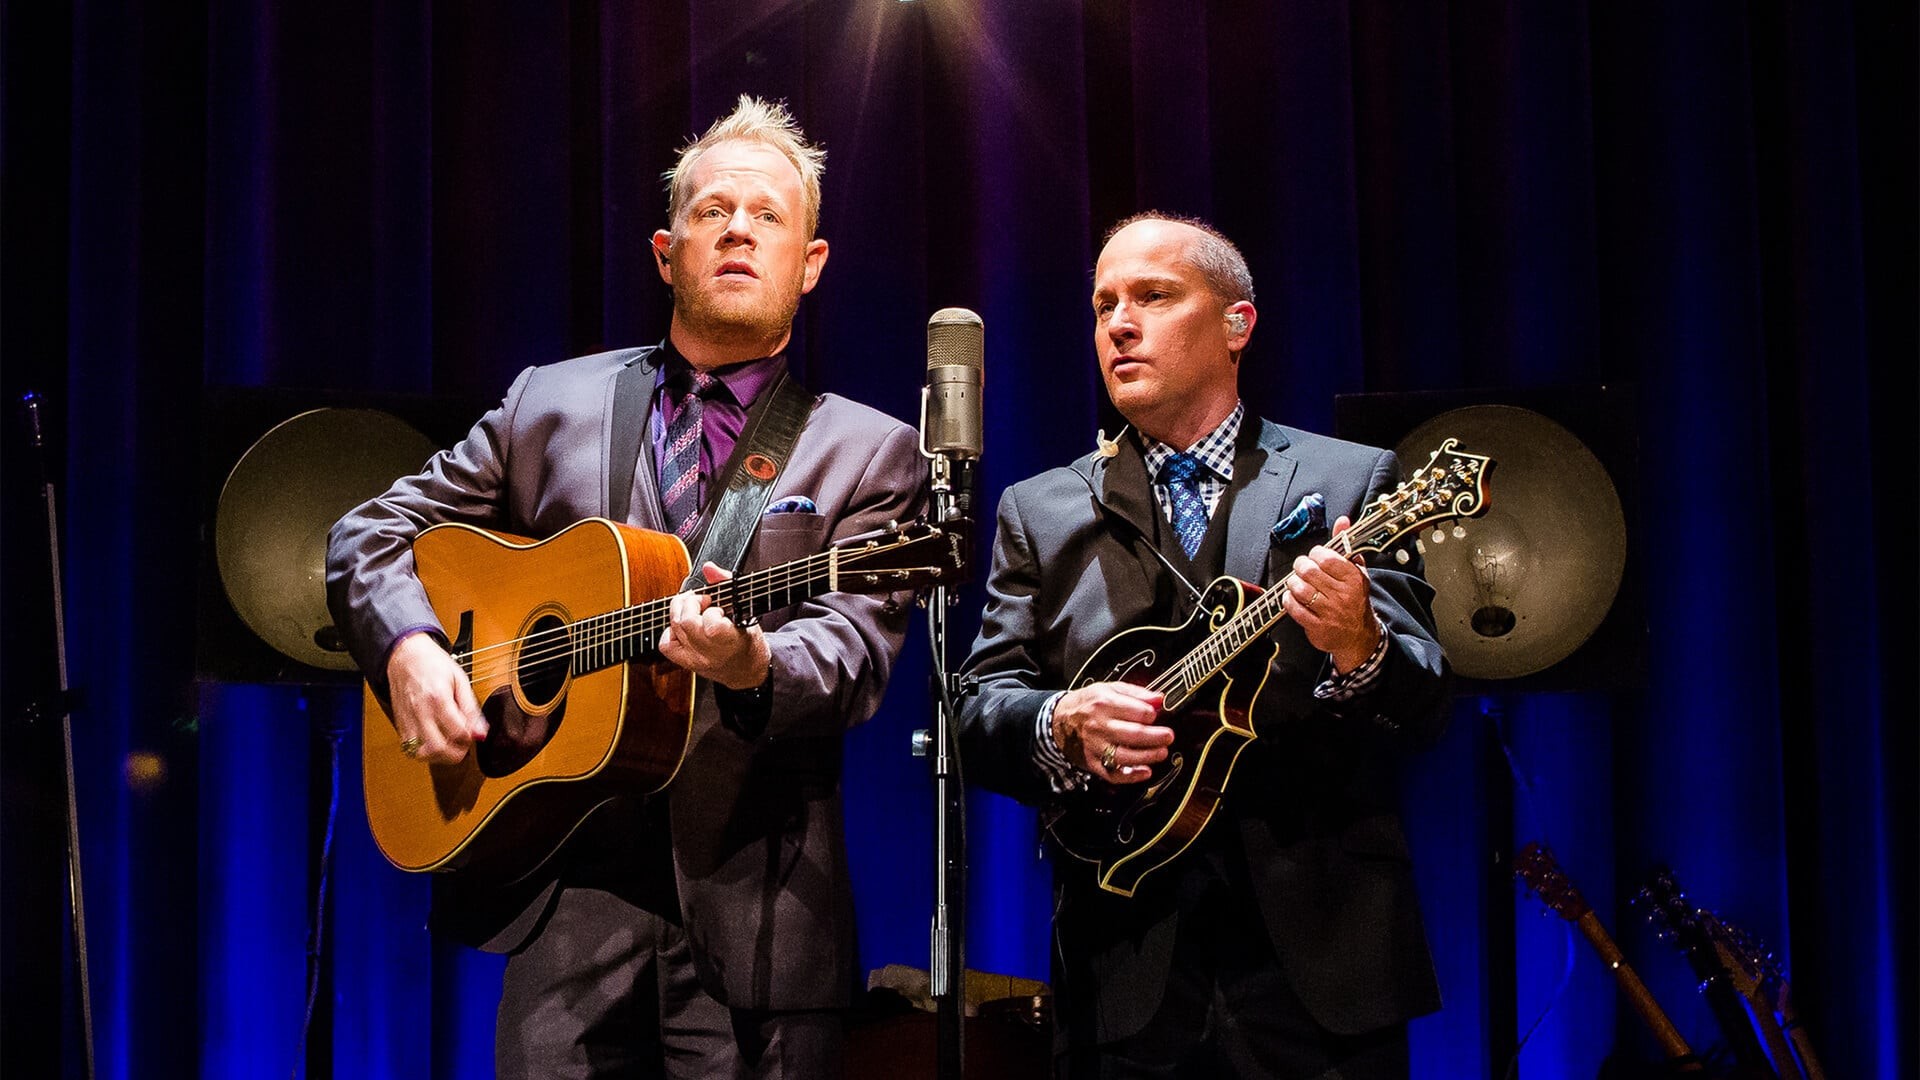 1920x1080 Spring Bluegrass Concerts presents Dailey & Vincent @ Bluegrass Music Hall  of Fame and Museum |